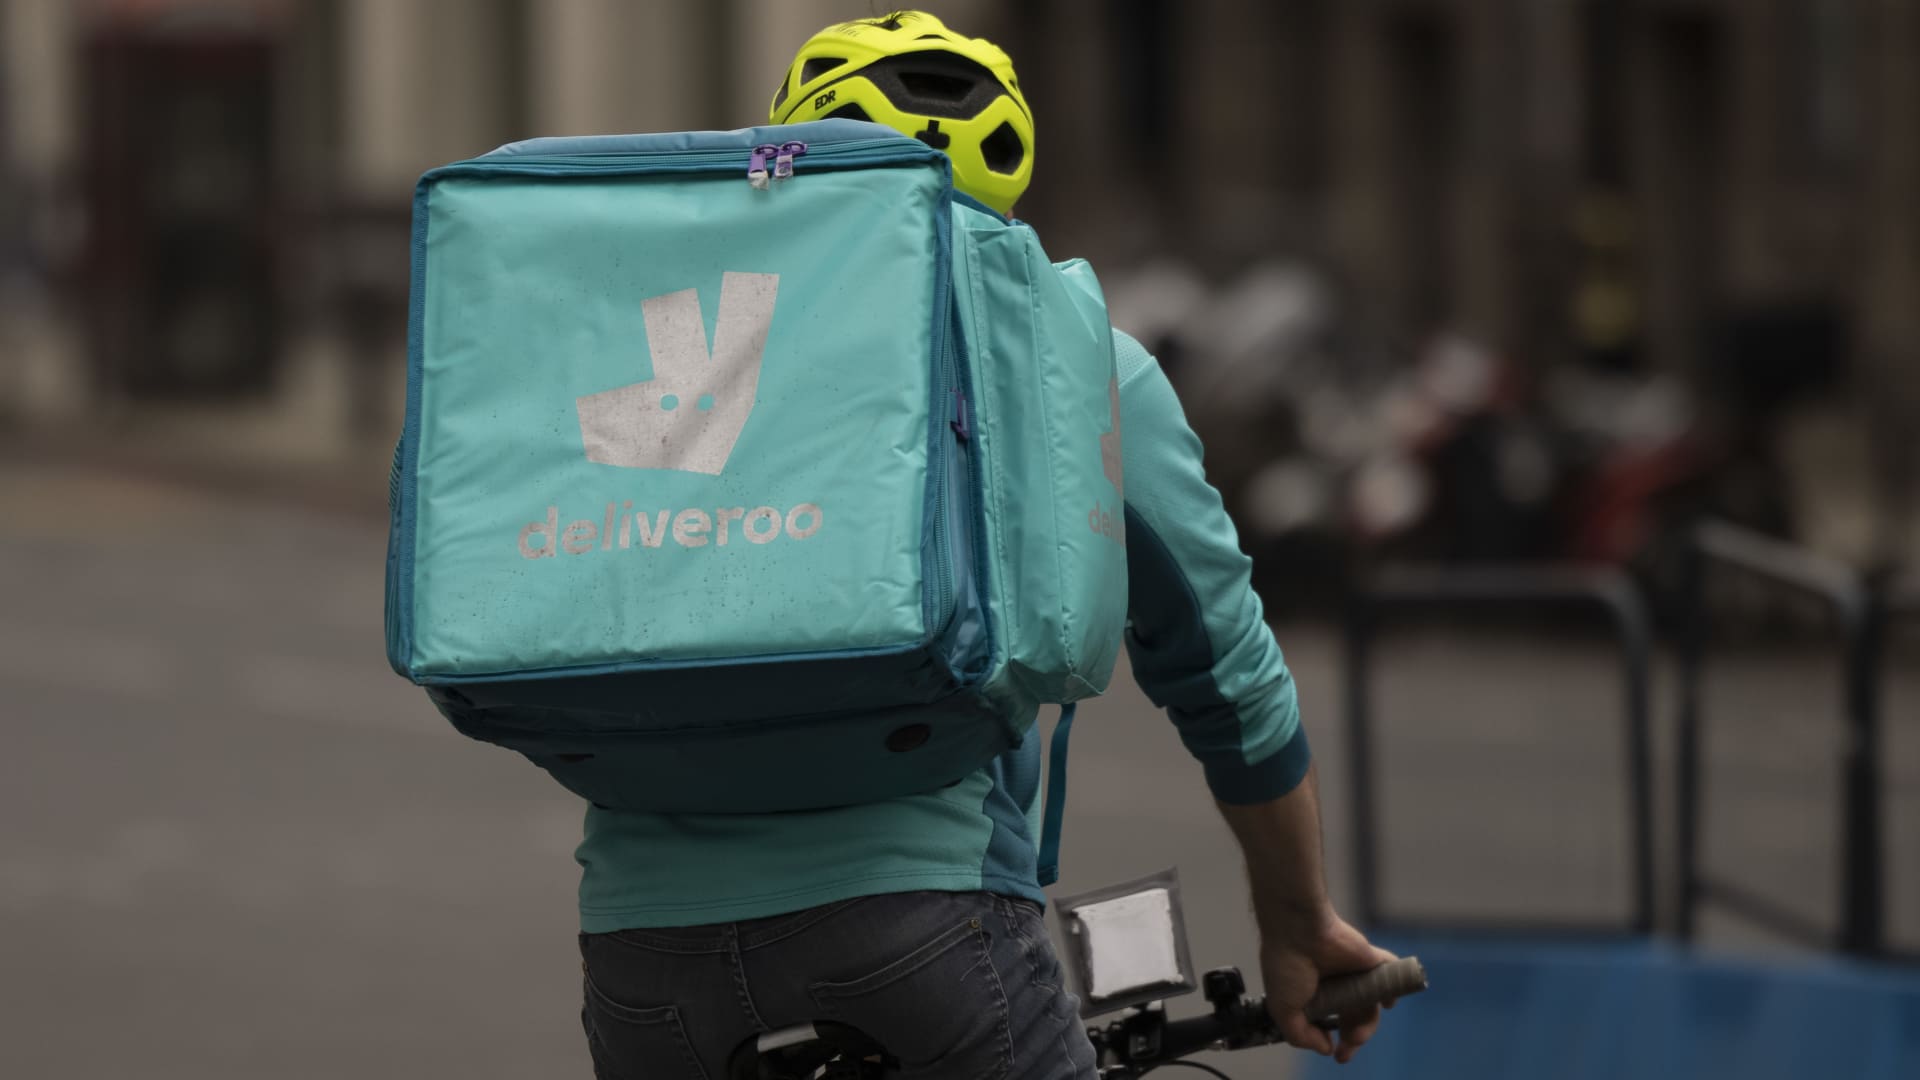 Delivery Hero plunges to record low after selling stake in food delivery rival Deliveroo